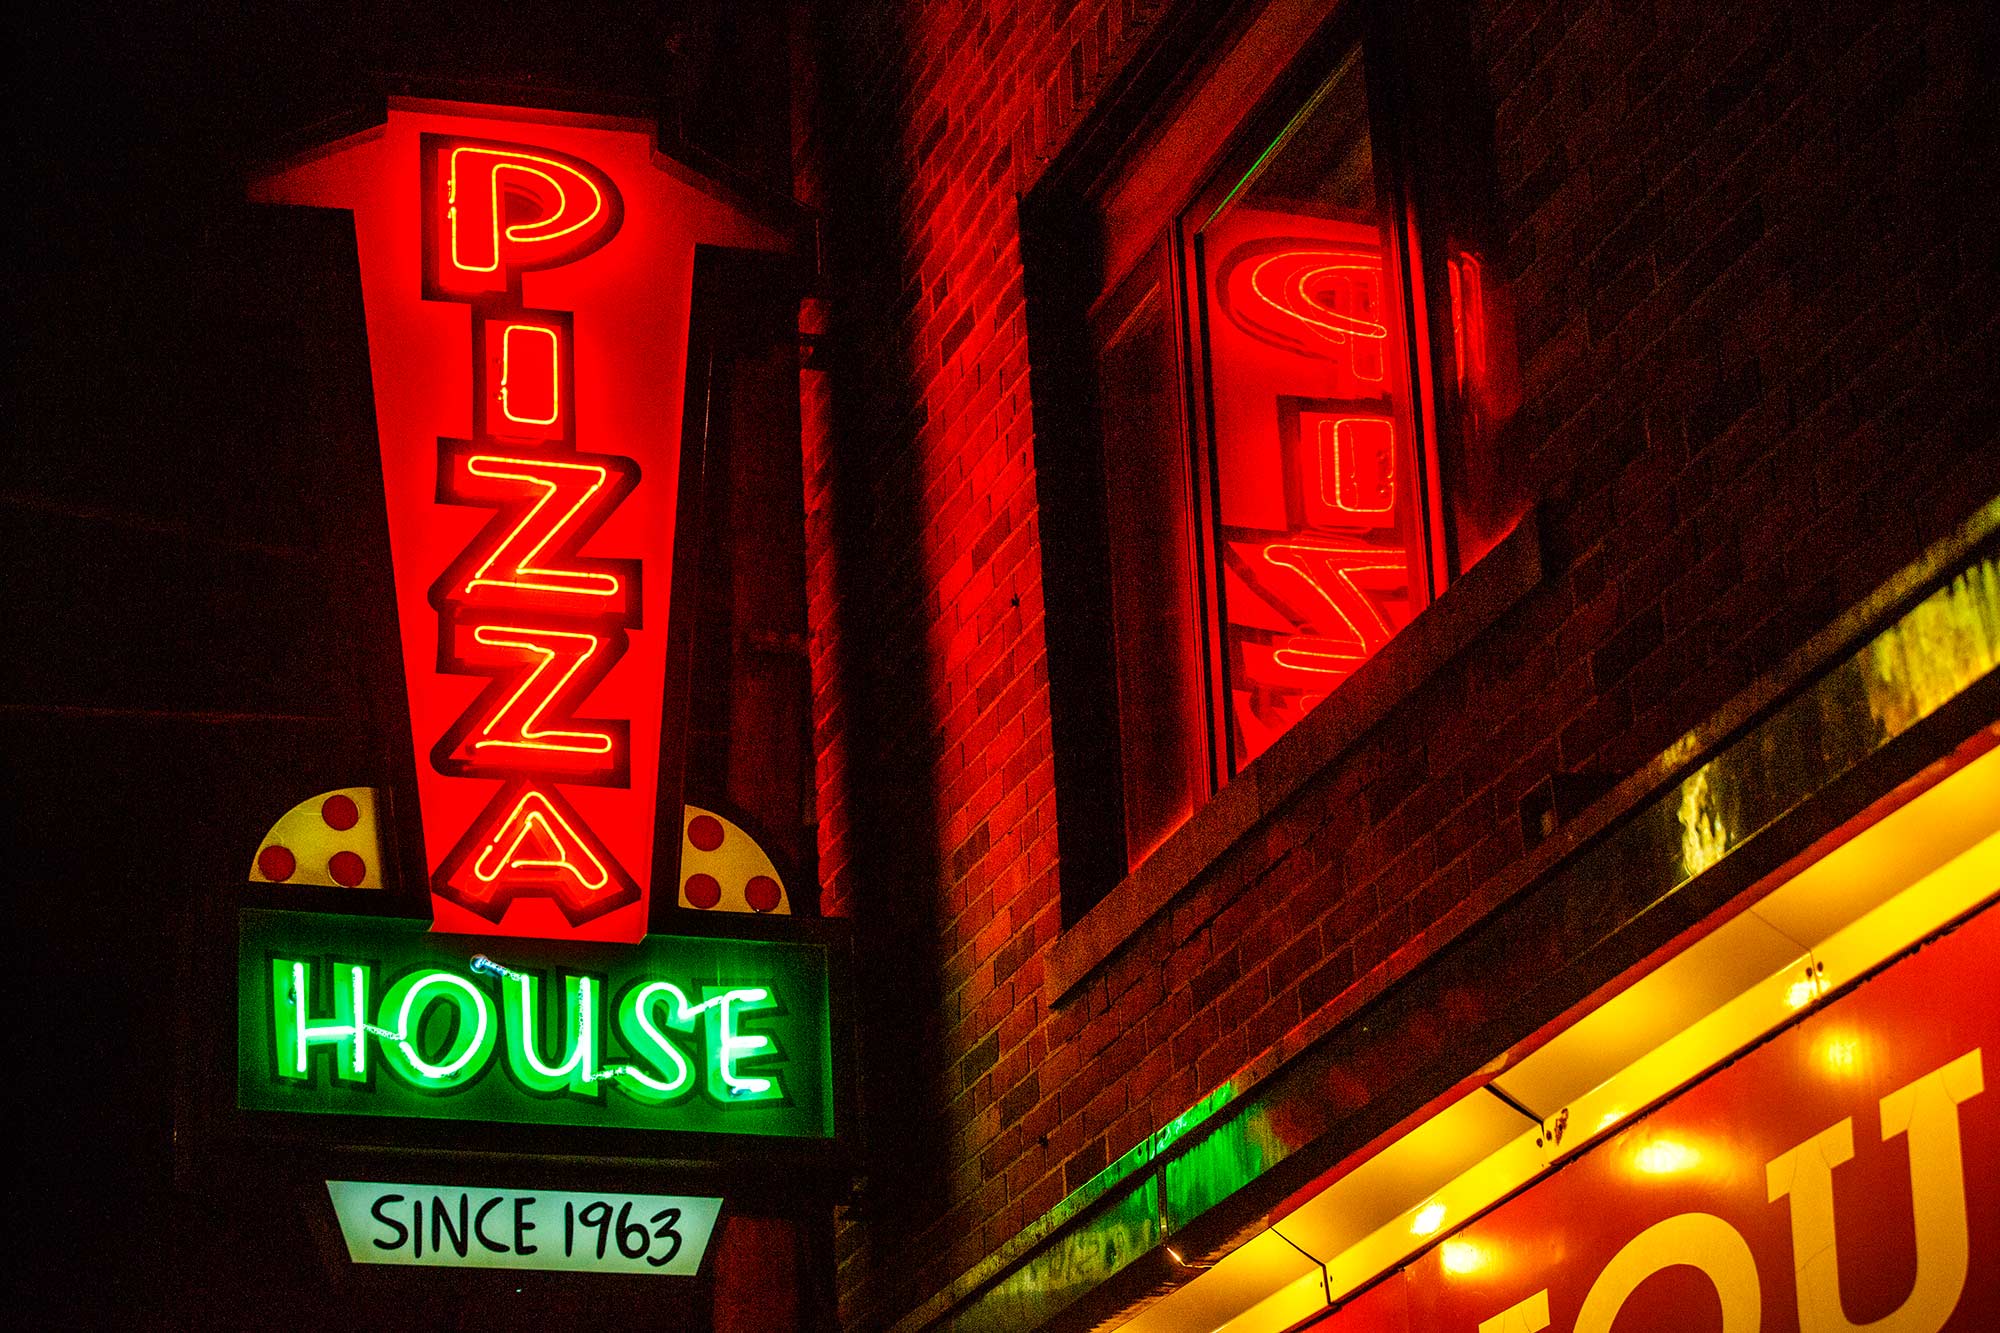 Pizza House, New Haven, CT - 7/6